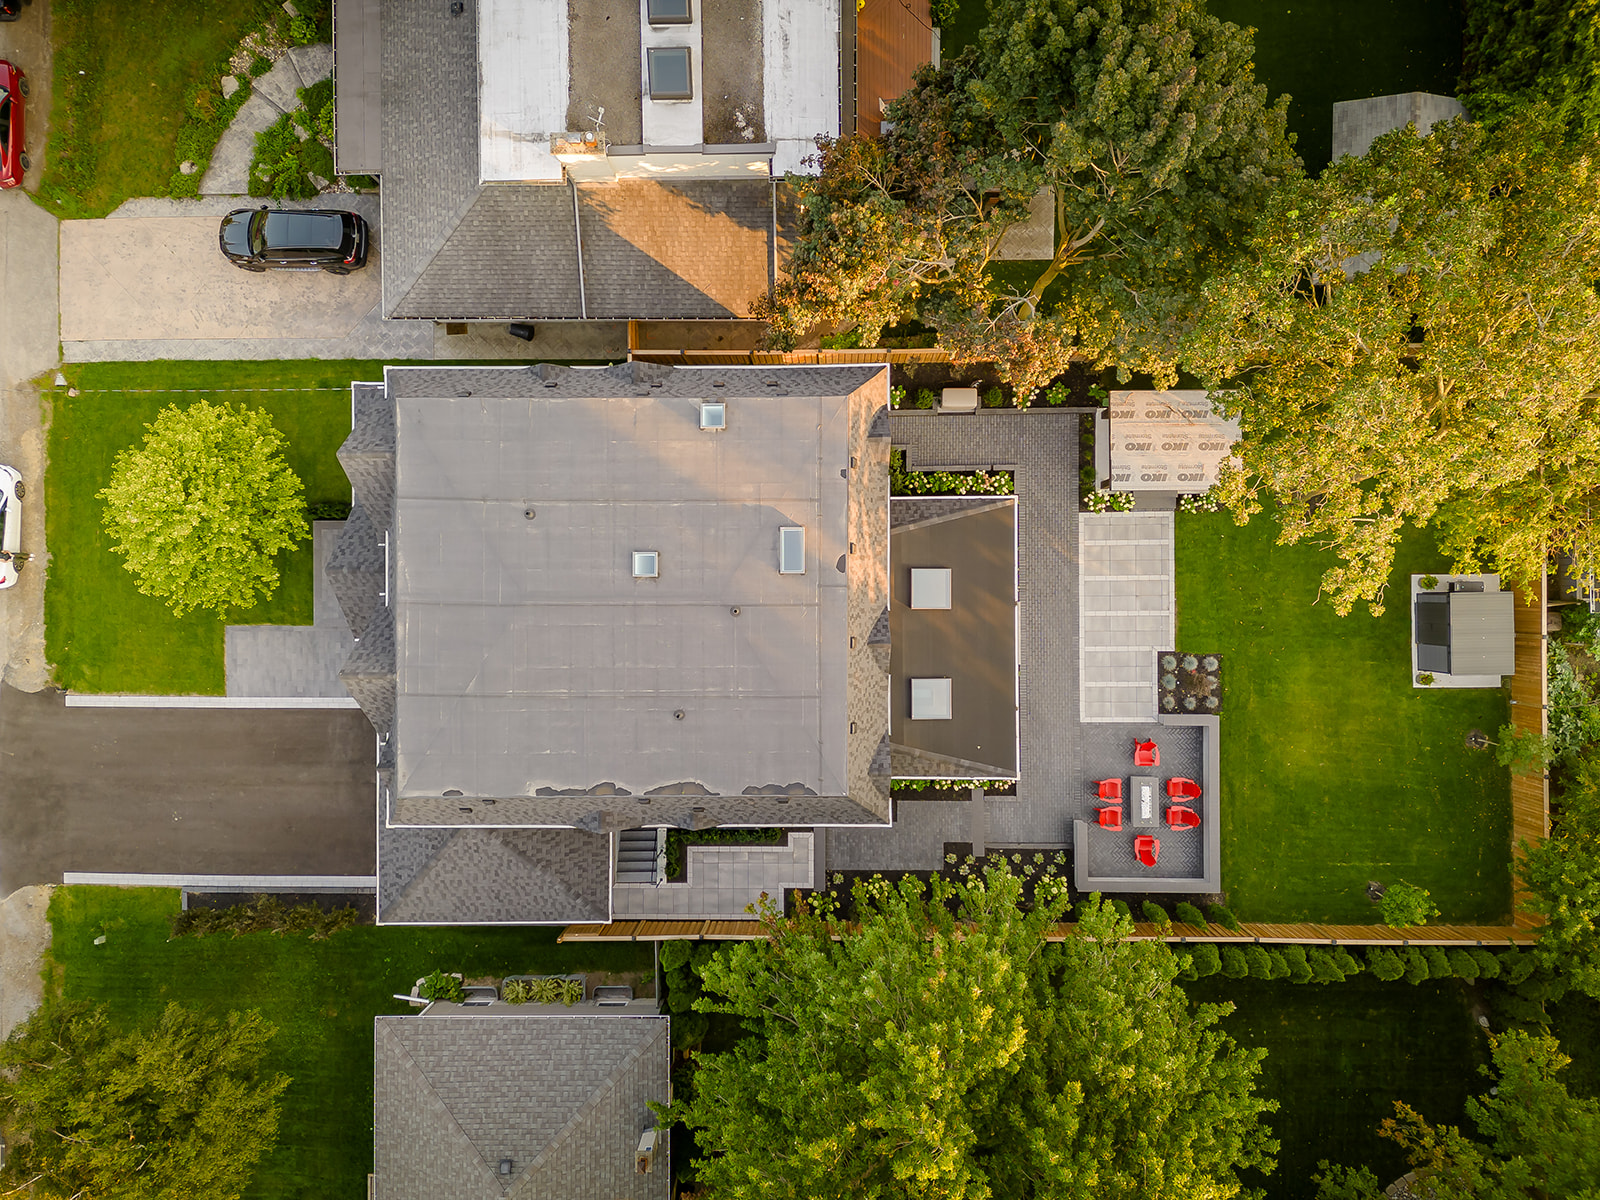 A top-down view of the backyard.